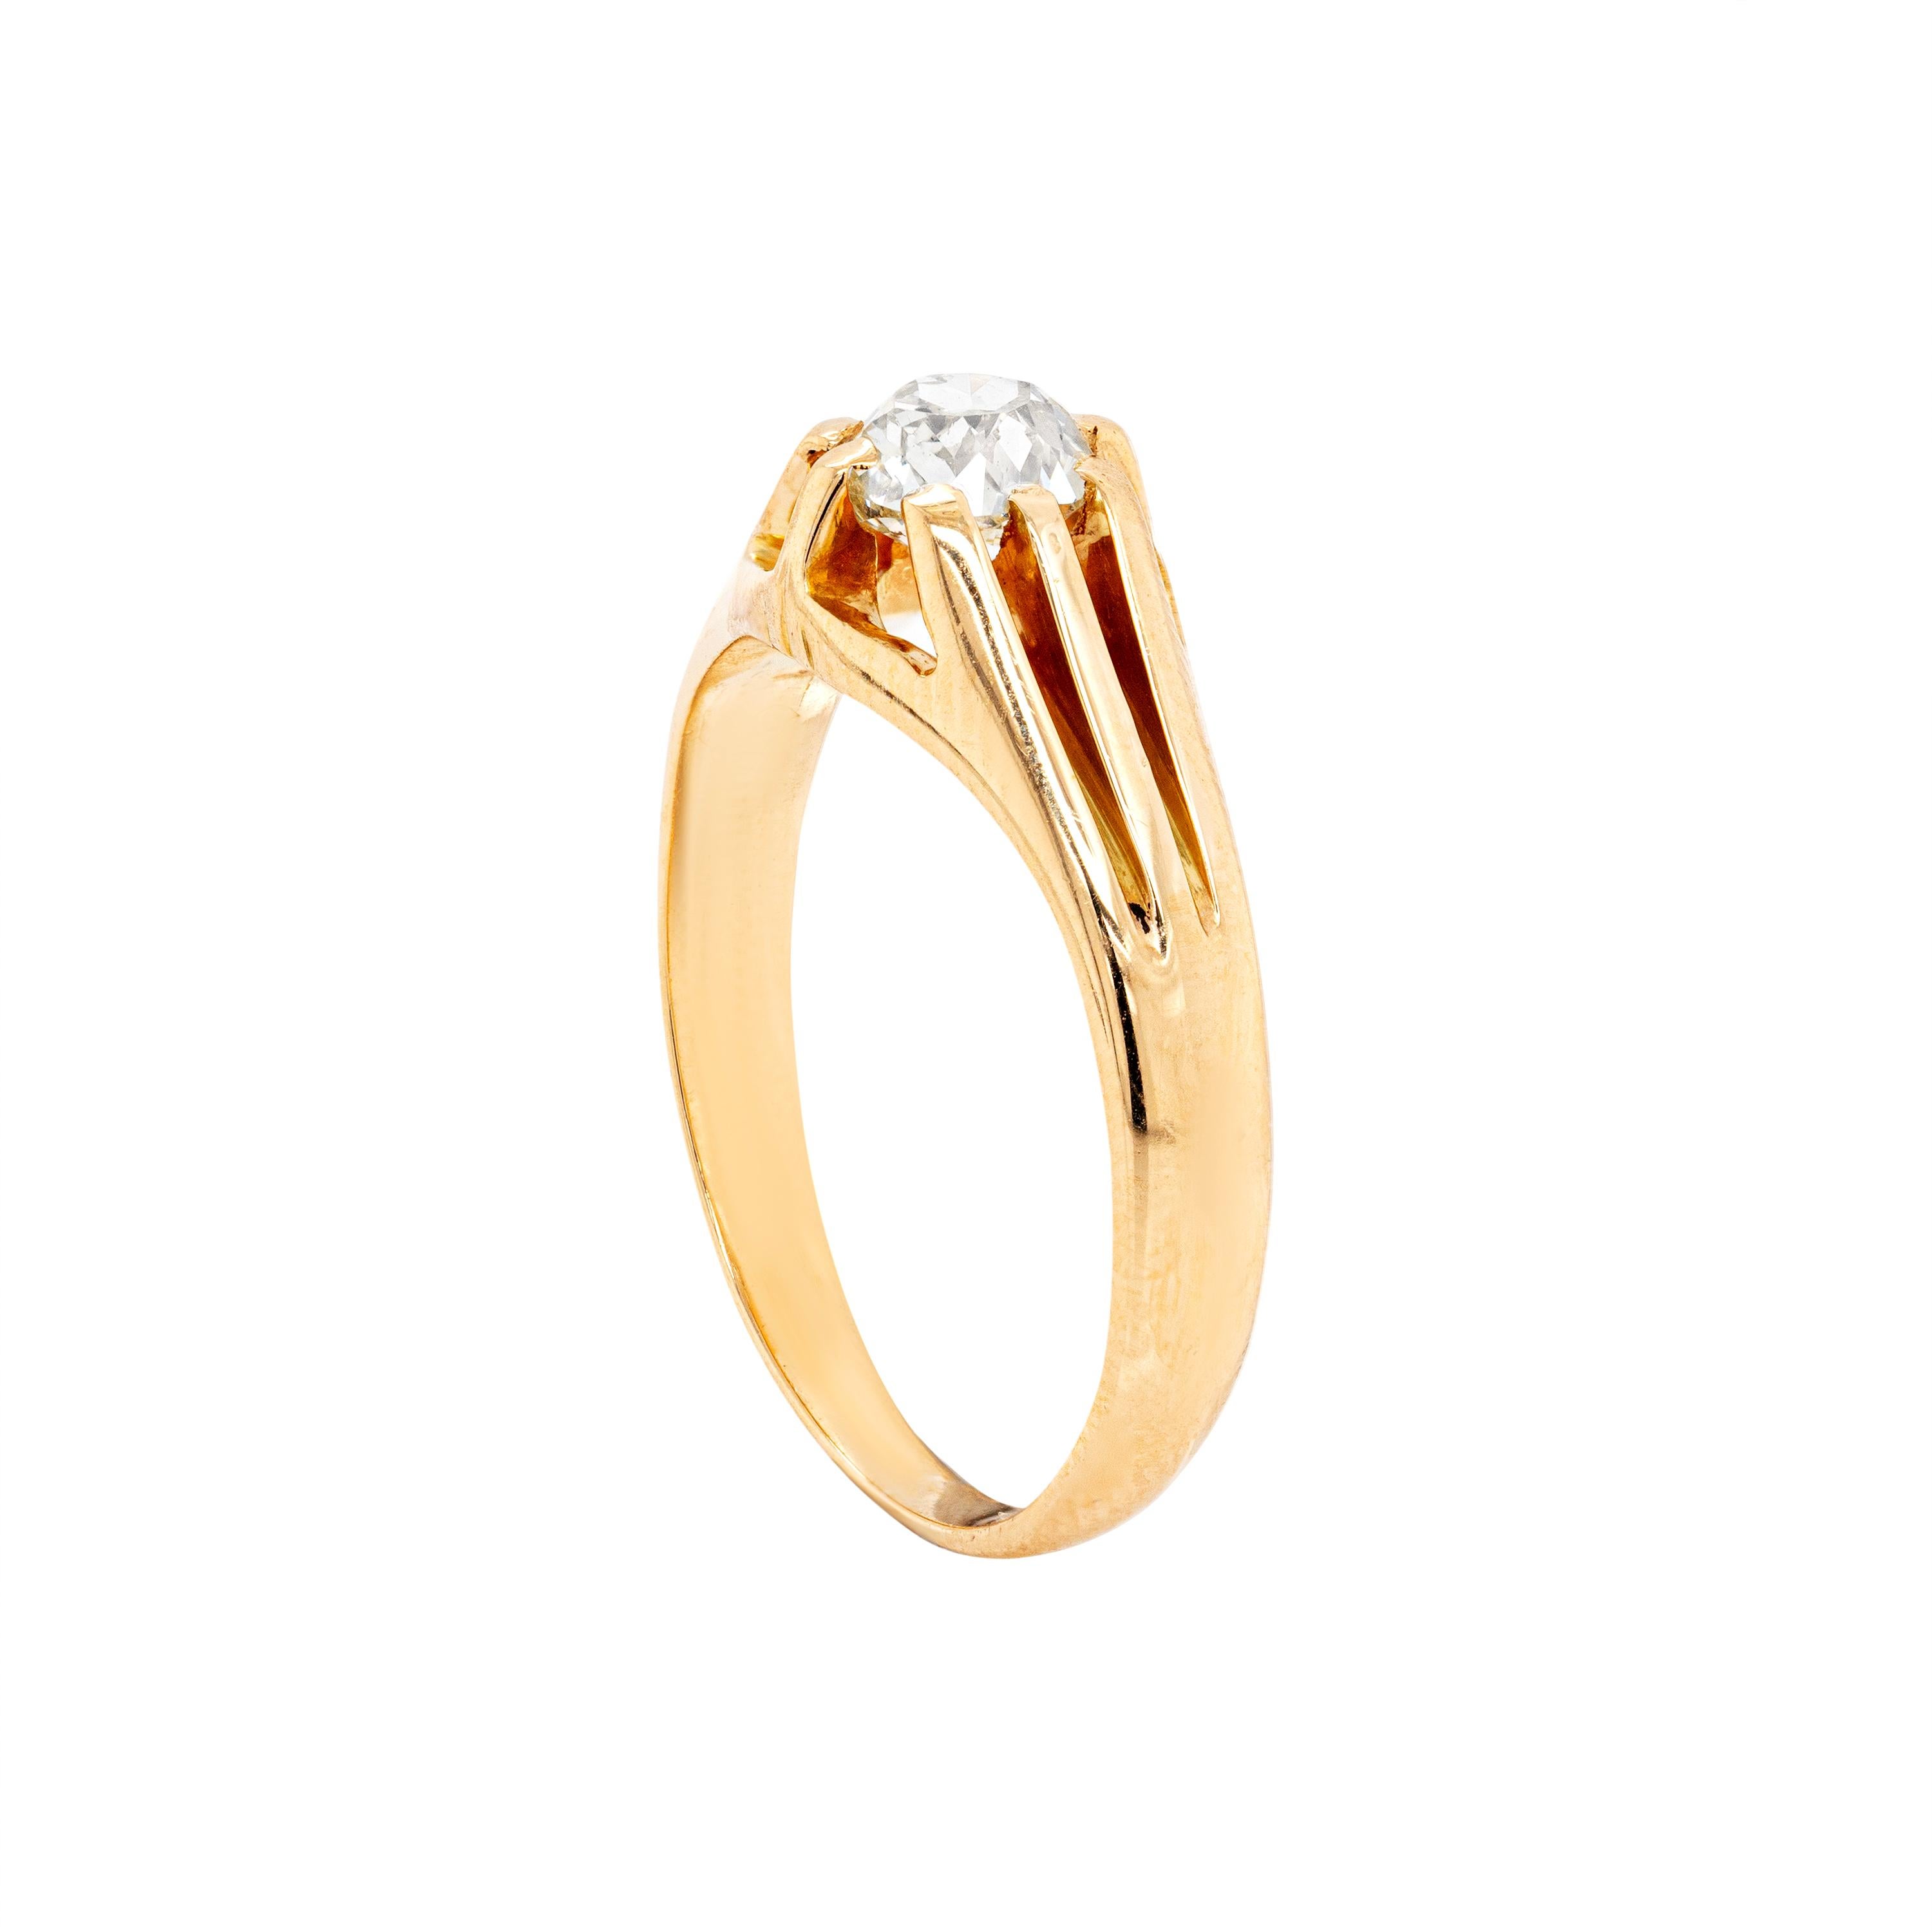 A classic 18 carat yellow gold antique ring centred with a beautiful old mine cut diamond weighing 0.57ct, mounted in a raised eight claw, open back setting. Tested 18 carat gold. UK finger size 'L'.